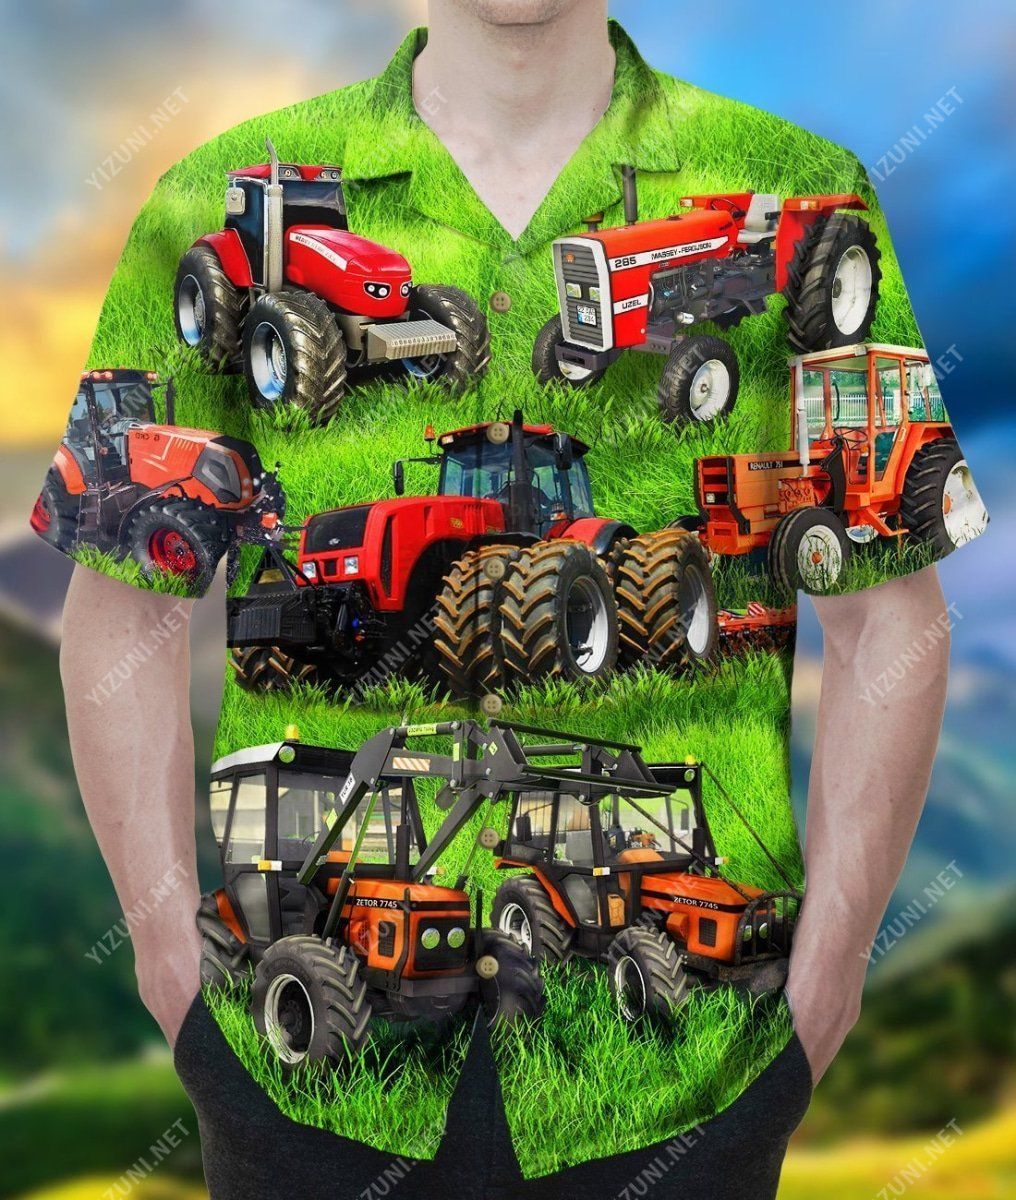 You Can Never Have Too Many Tractors Green Amazing Design Unisex Hawaiian Shirt For Men And Women   04061652